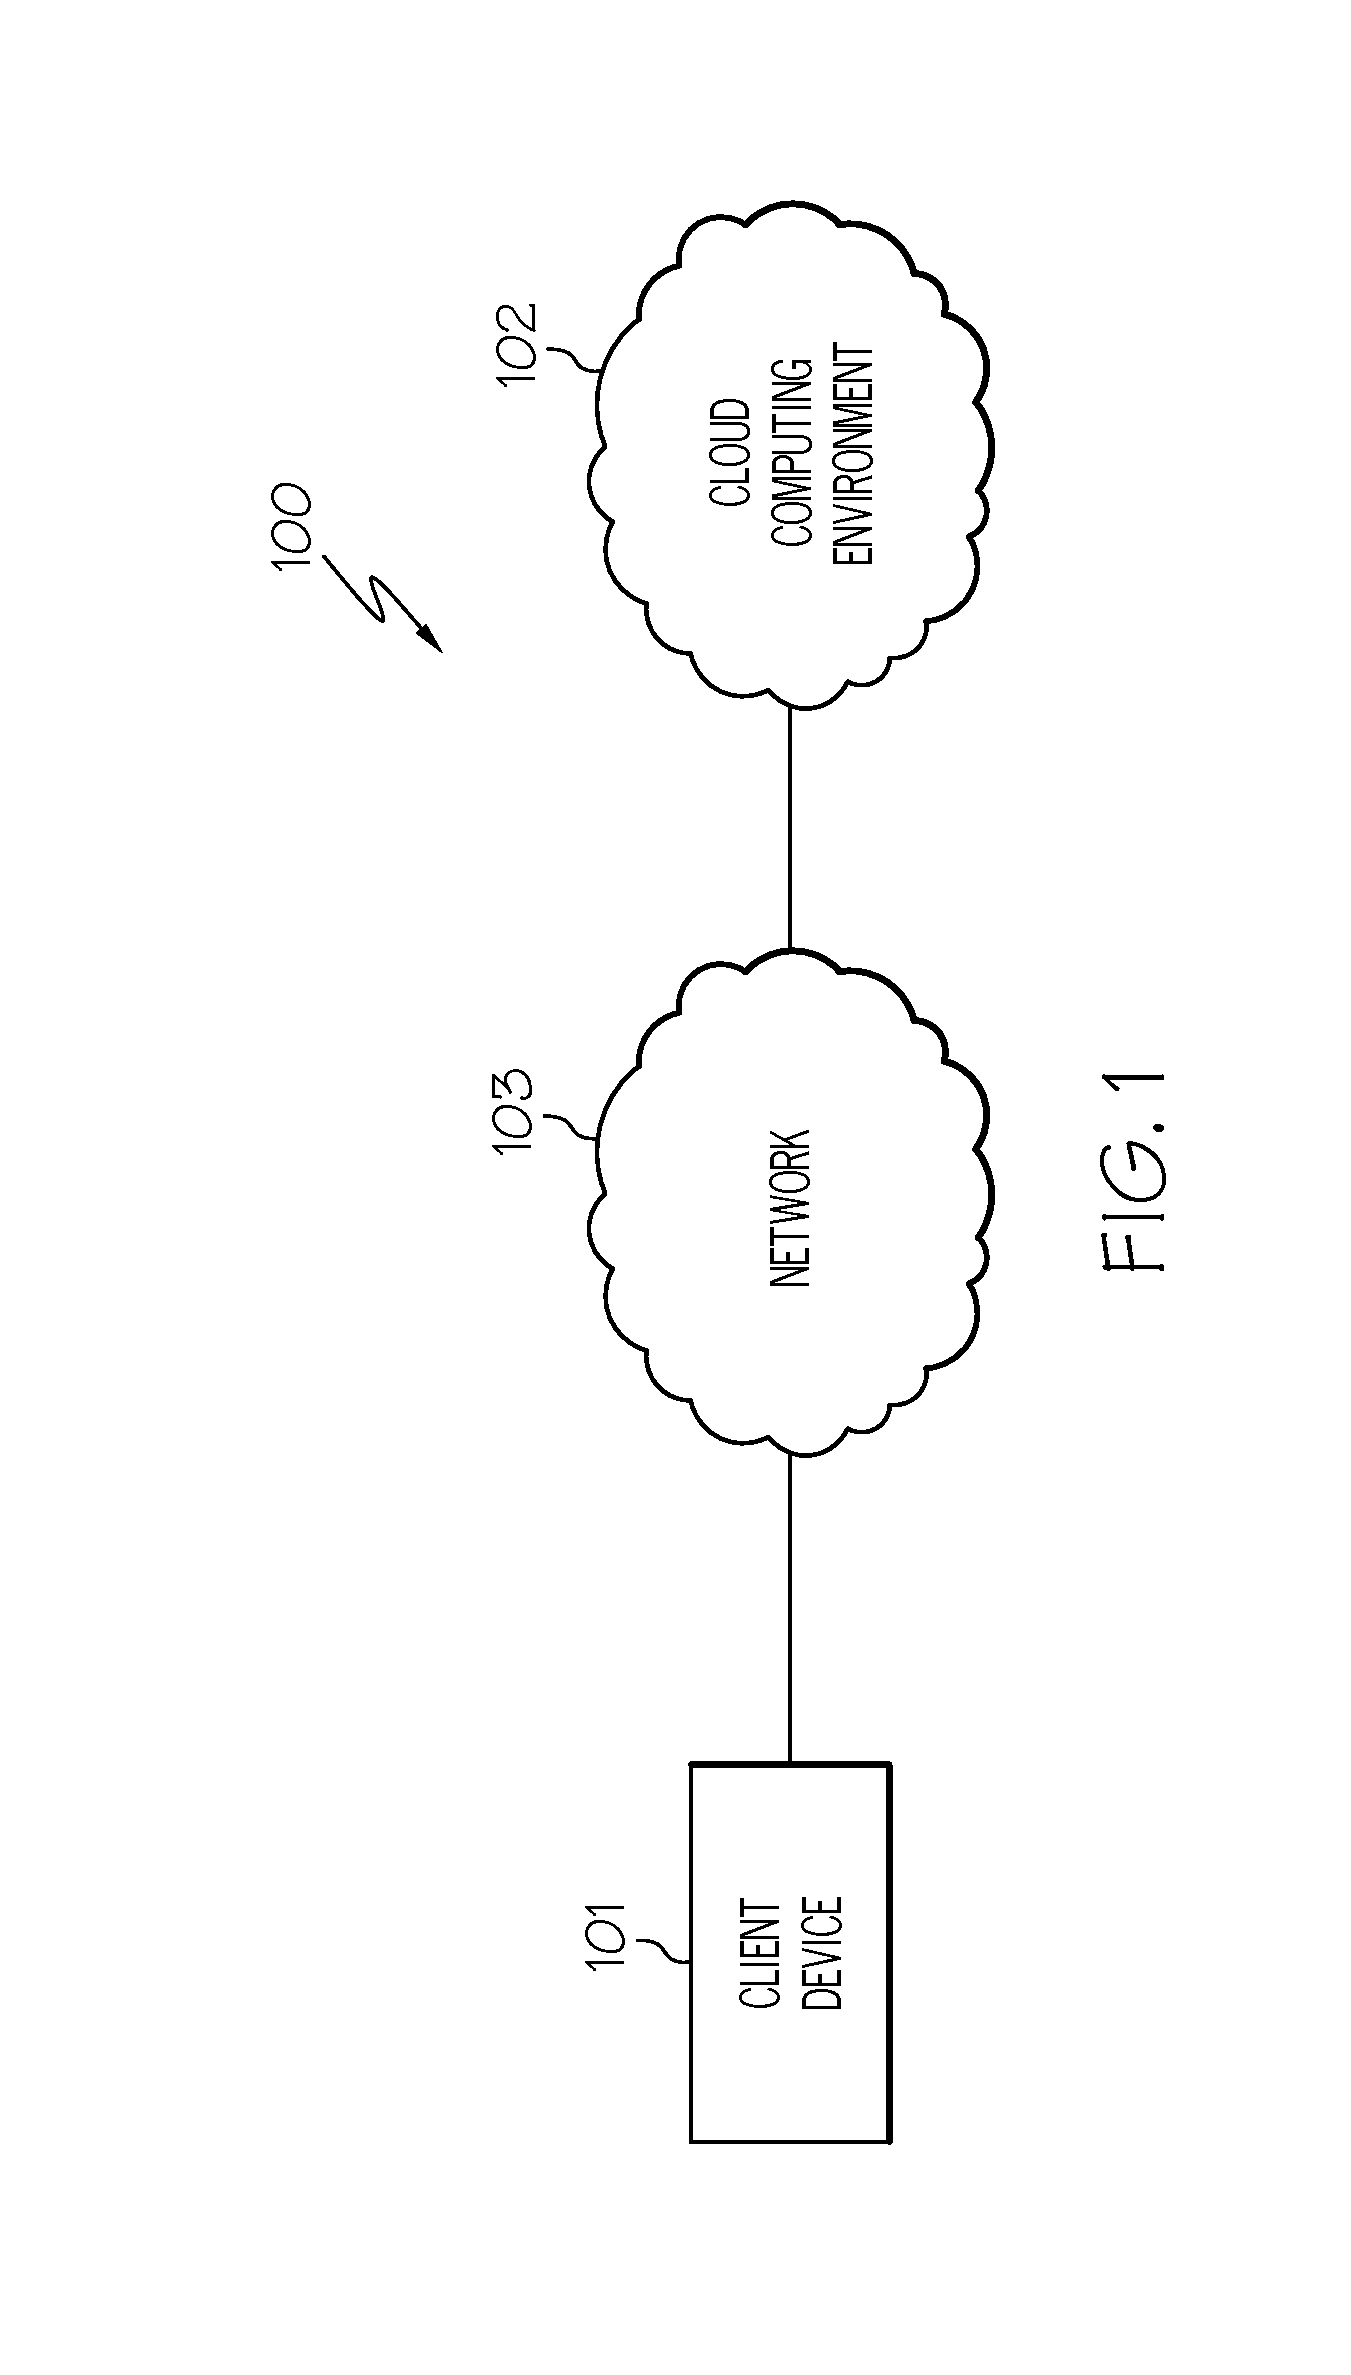 Robustness in a scalable block storage system